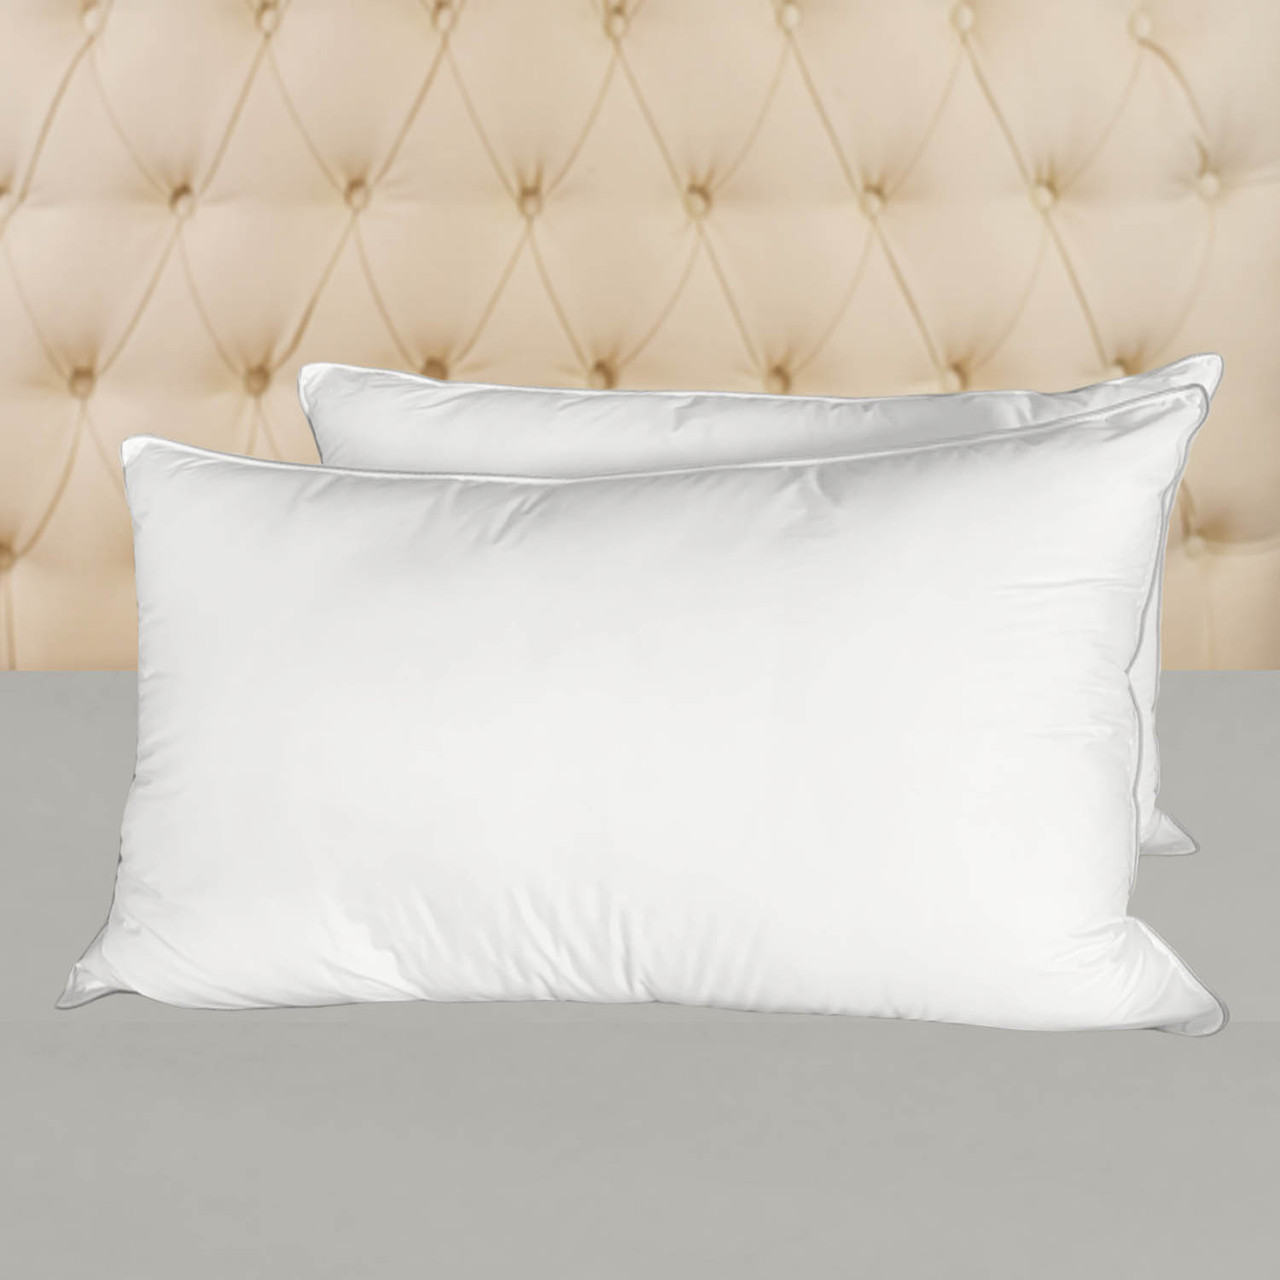 Premier Hotel Pillows---Allergy Shields Anti-Dustmite Microfiber Pillows,  Medium Firm-filled, Set of Two